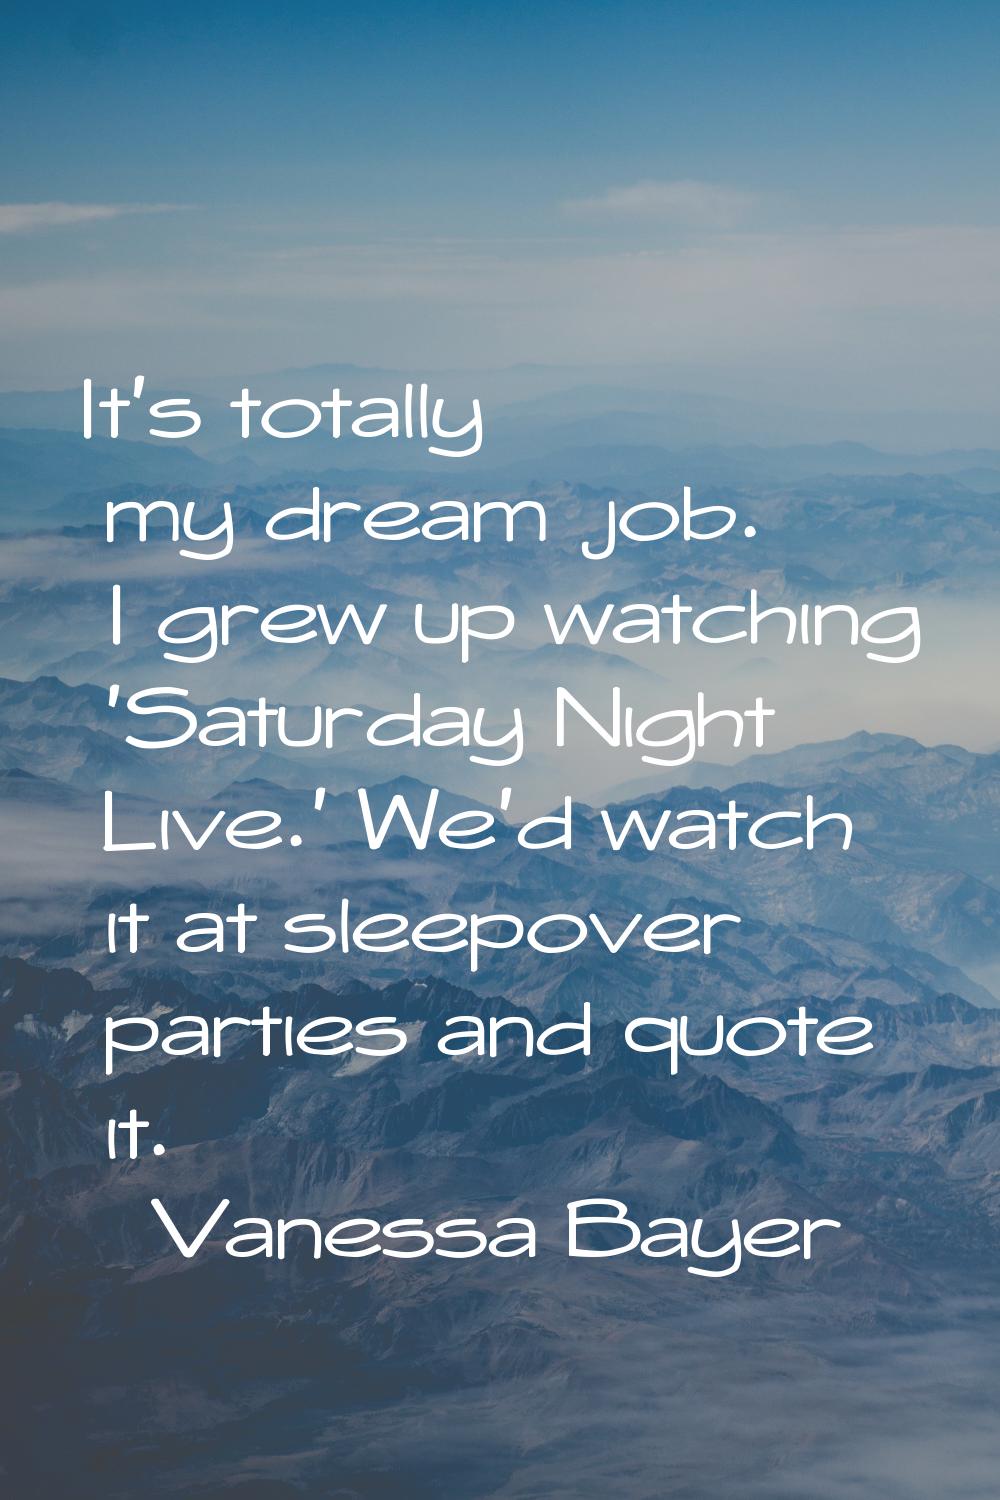 It's totally my dream job. I grew up watching 'Saturday Night Live.' We'd watch it at sleepover par